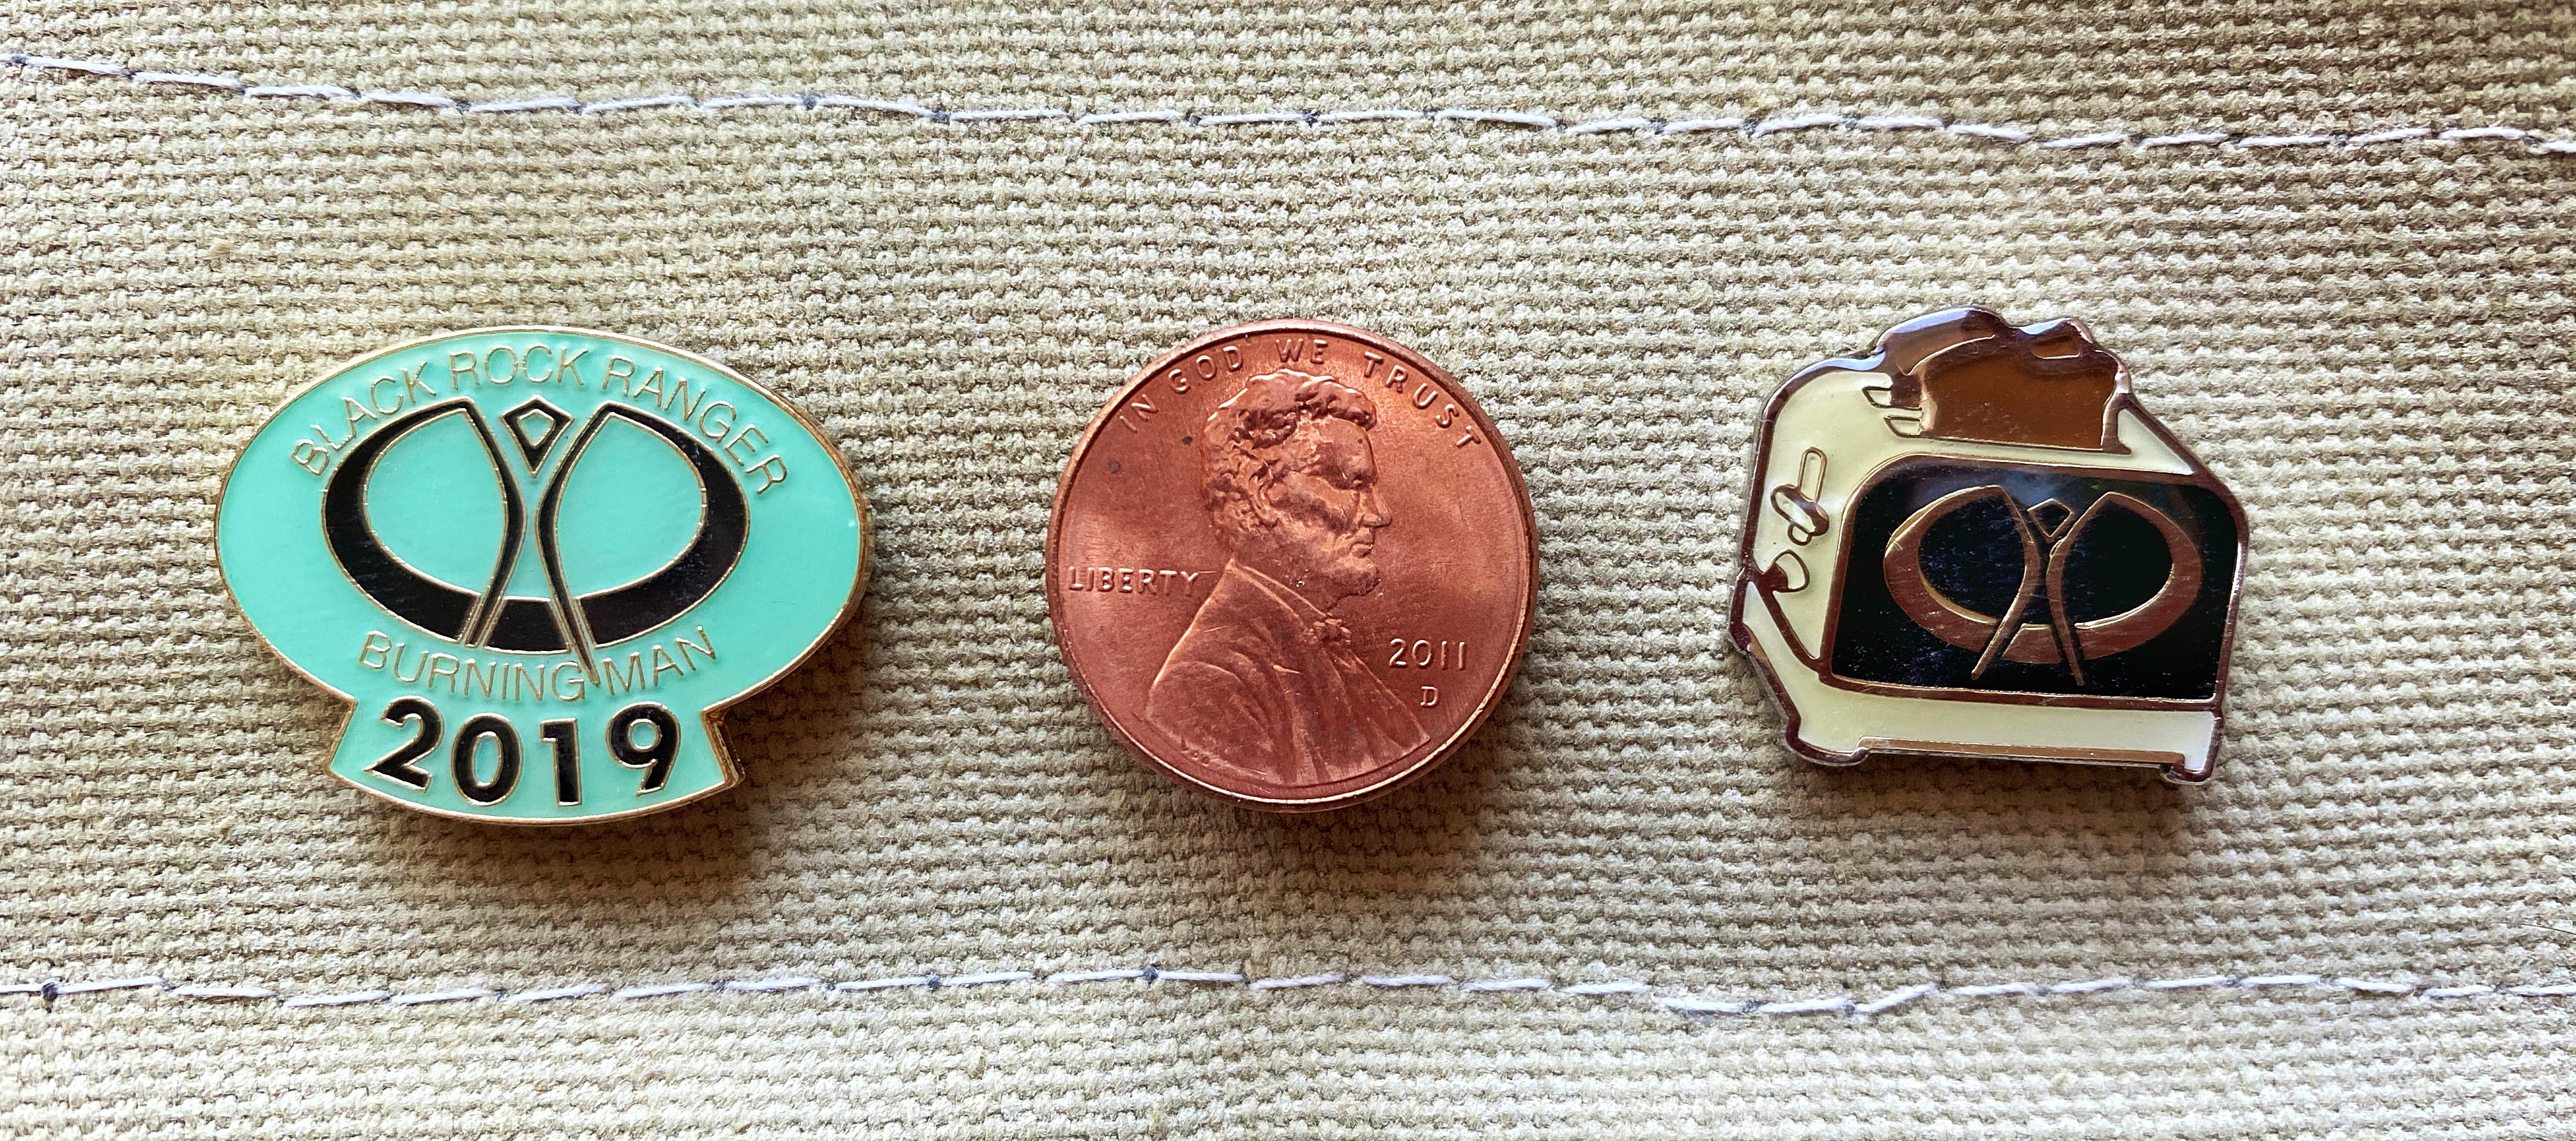 Annual Service Pin, Shiny Penny Pine, and Toaster Pin